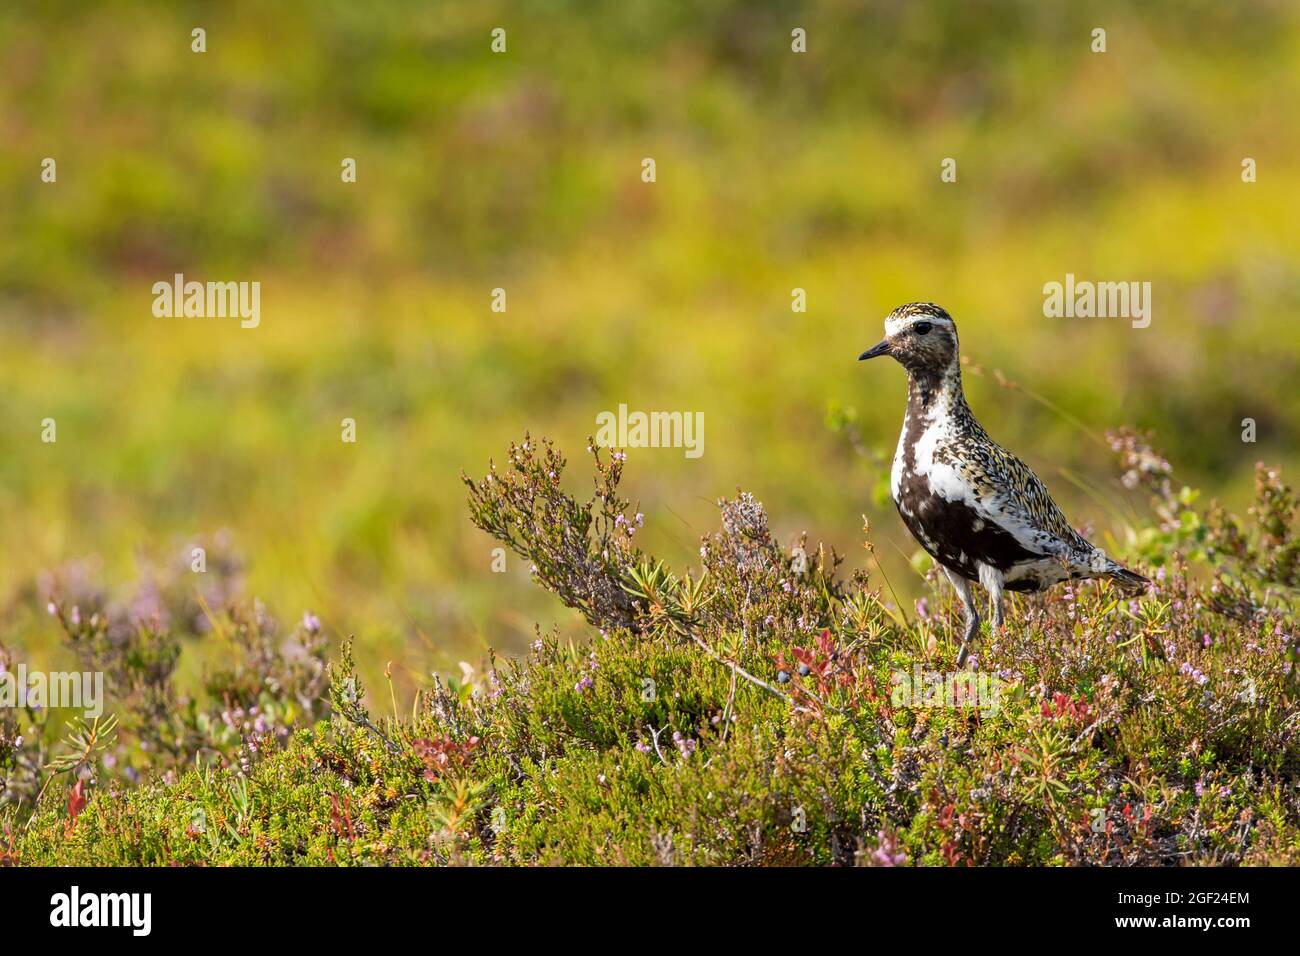 Beautiful European golden plover, Pluvialis apricaria, standing in its colorful habitat in Finnish wilderness at Riisitunturi National Park, Finland, Stock Photo